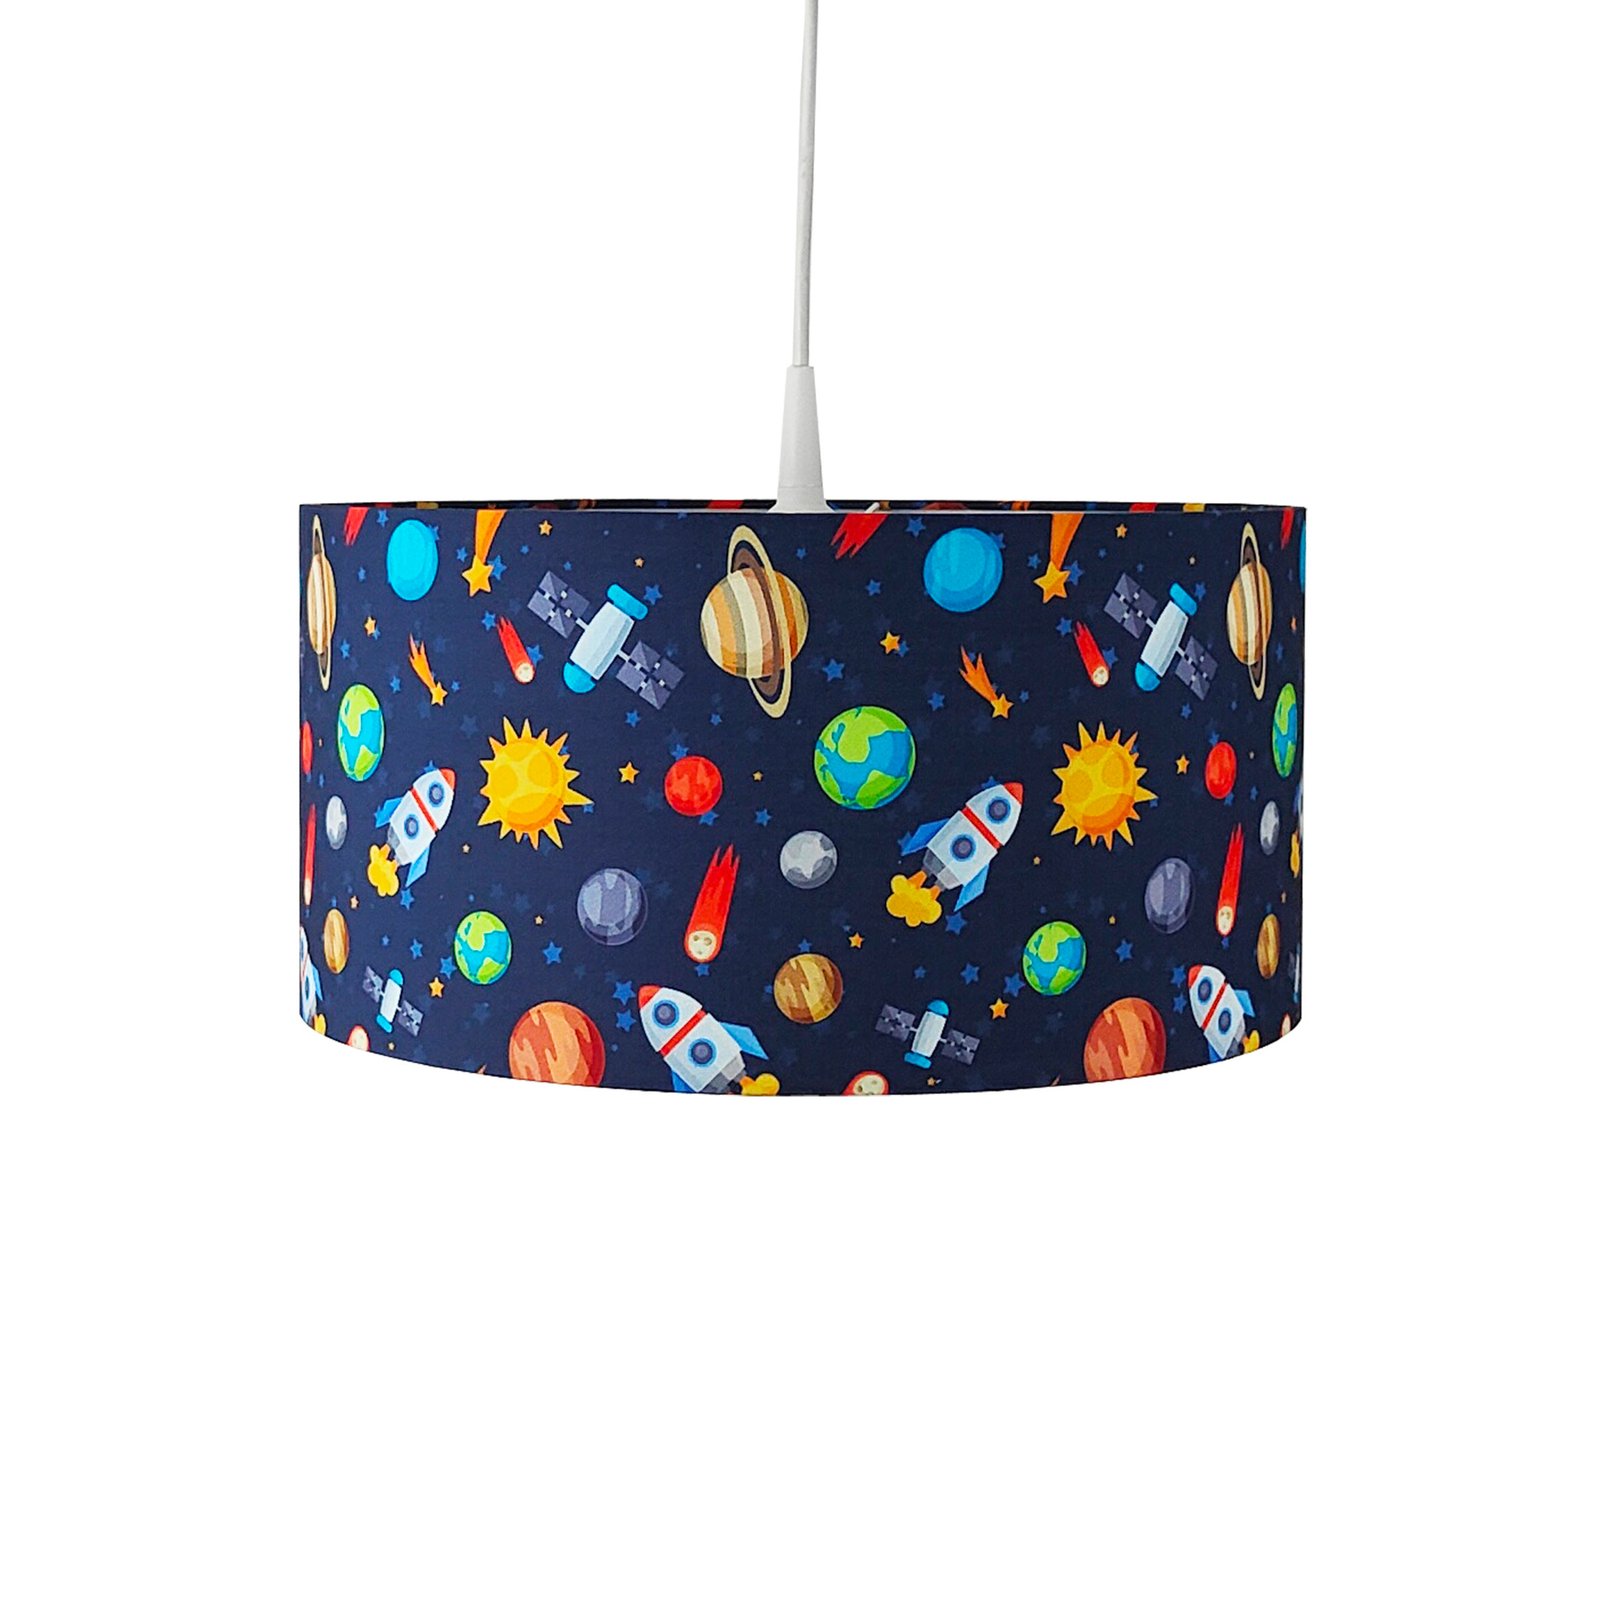 Space pendant light with a fabric lampshade